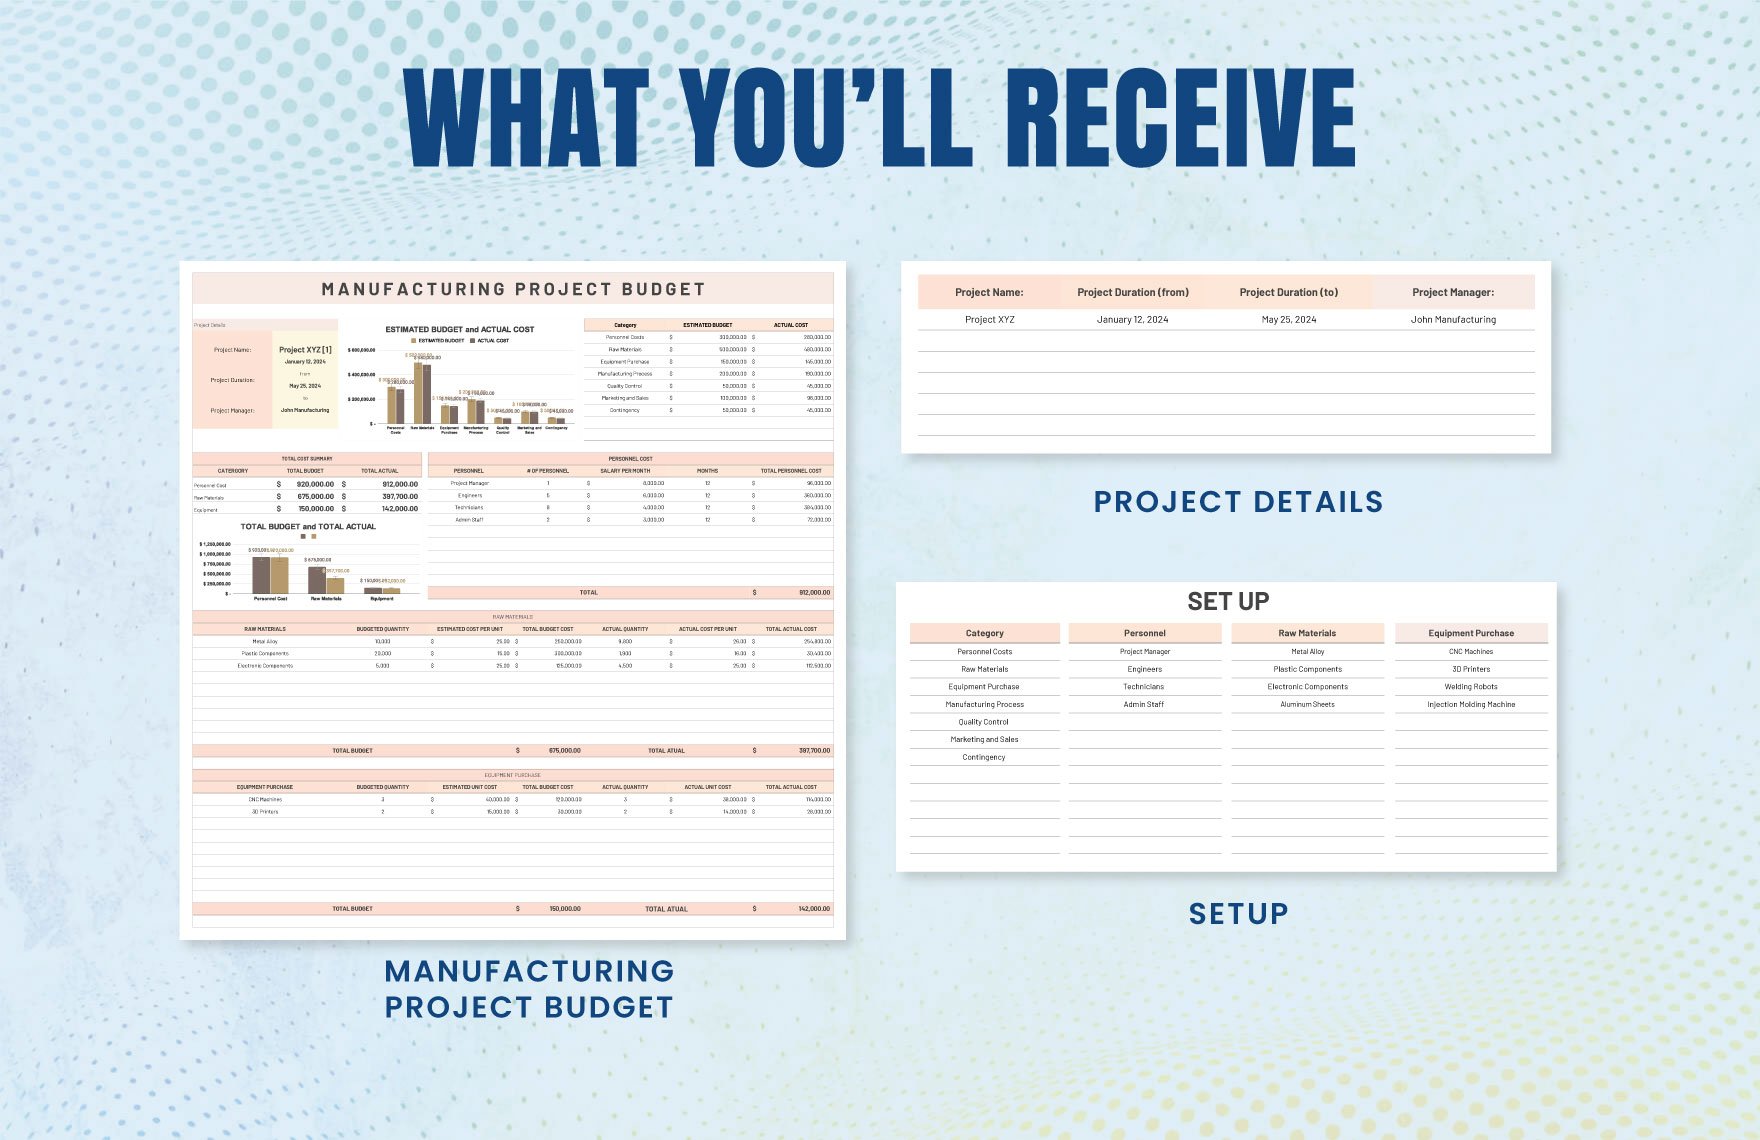 Manufacturing Project Budget Template